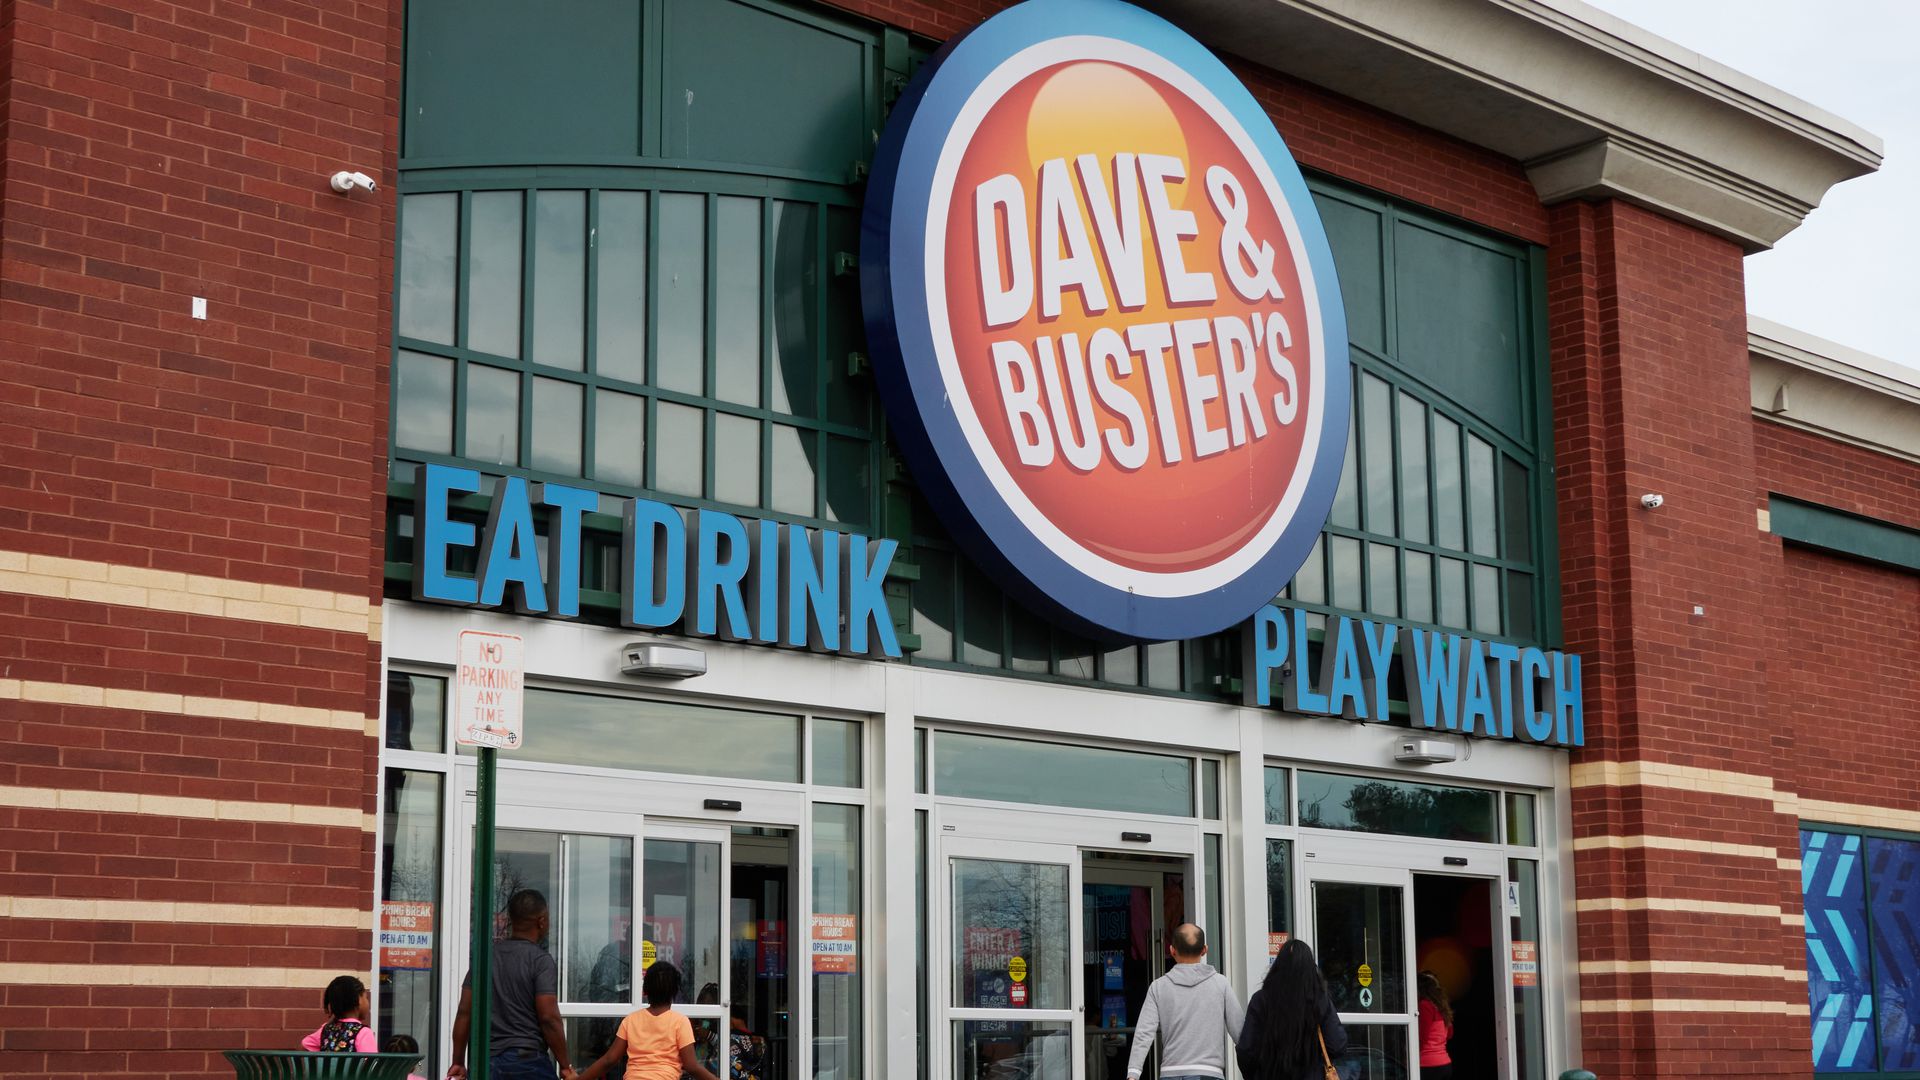 dave and buster’s is going to let you start gambling on arcade games